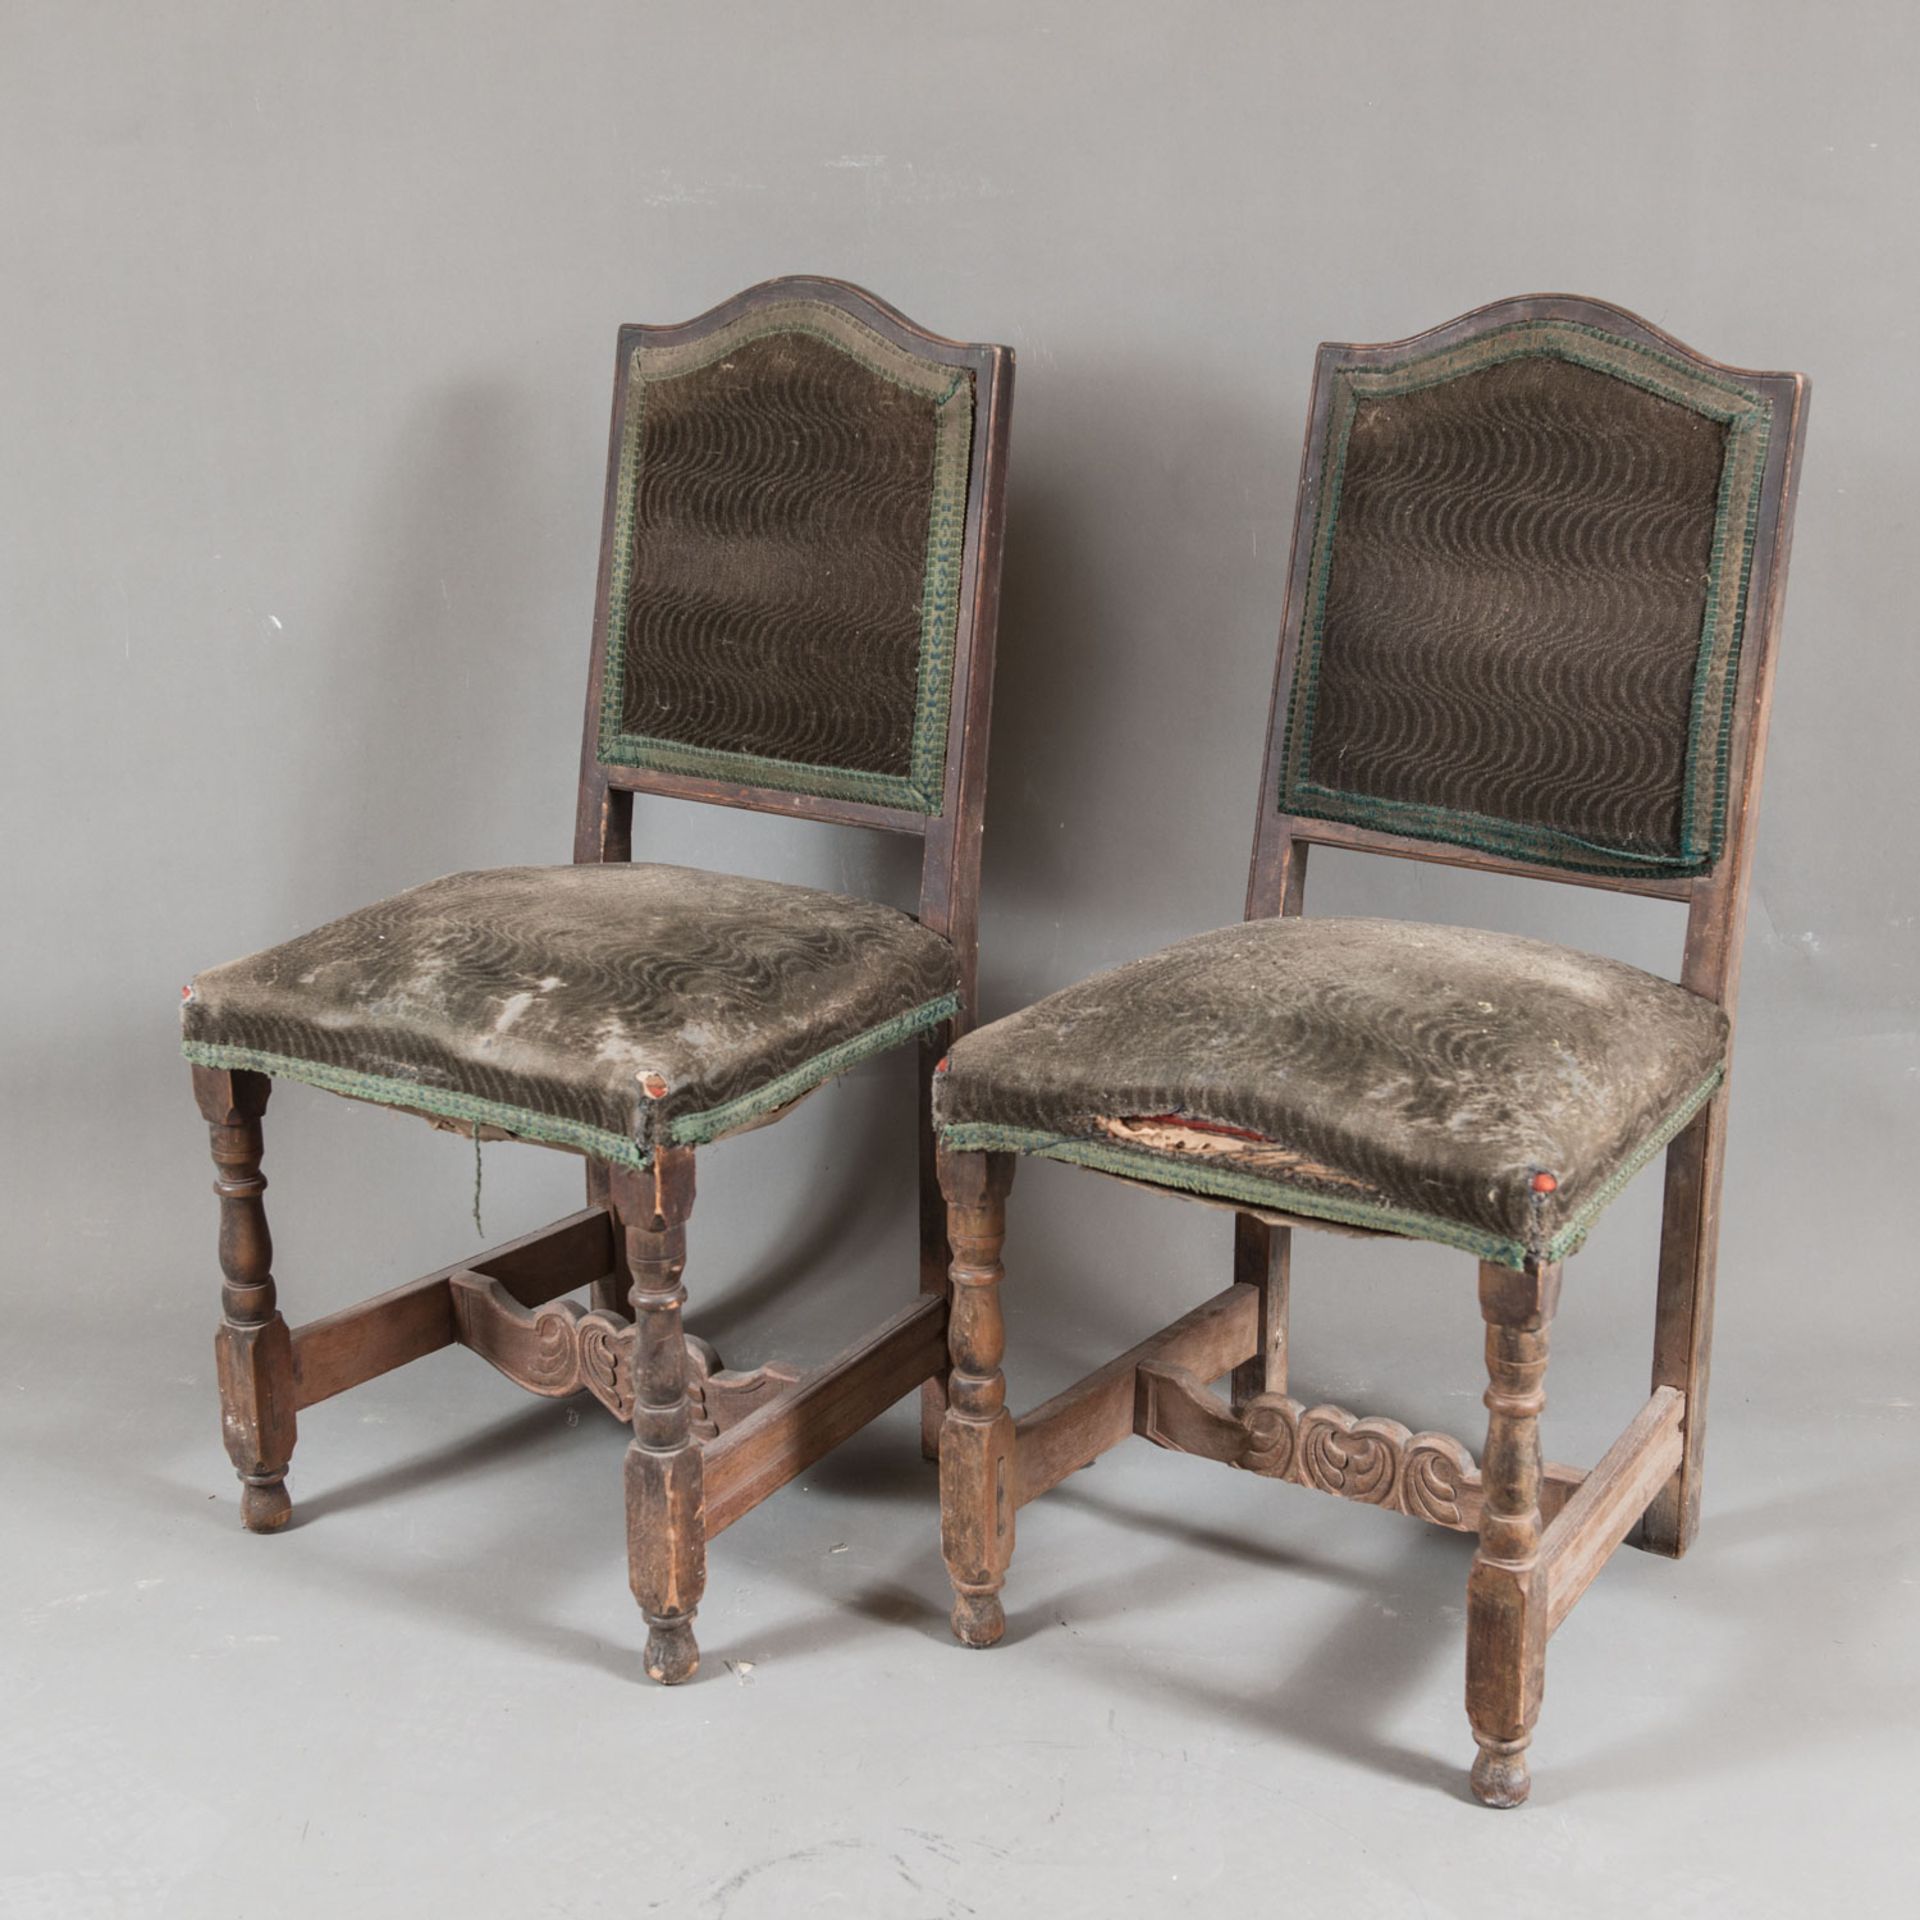 Four Manieristic Style Chairs - Image 2 of 3